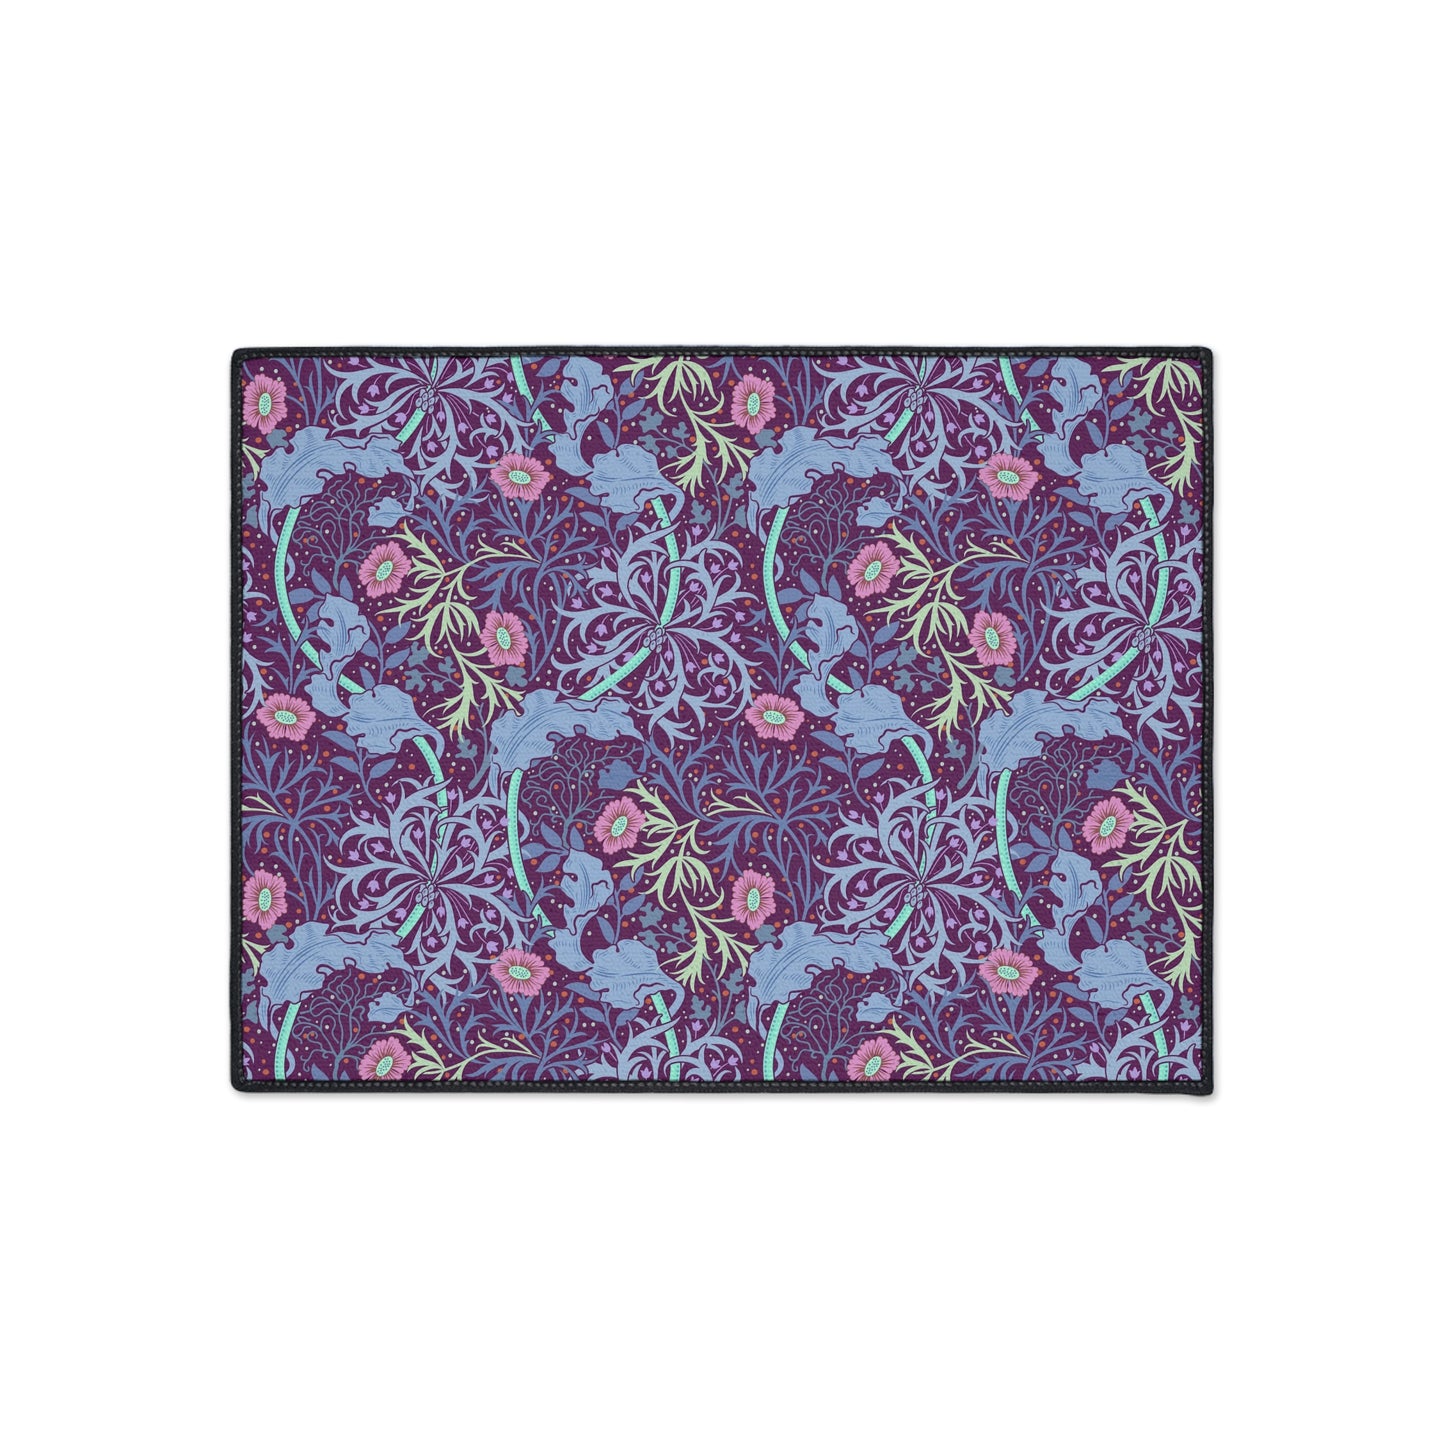 william-morris-co-heavy-duty-floor-mat-seaweed-collection-pink-flowers-5